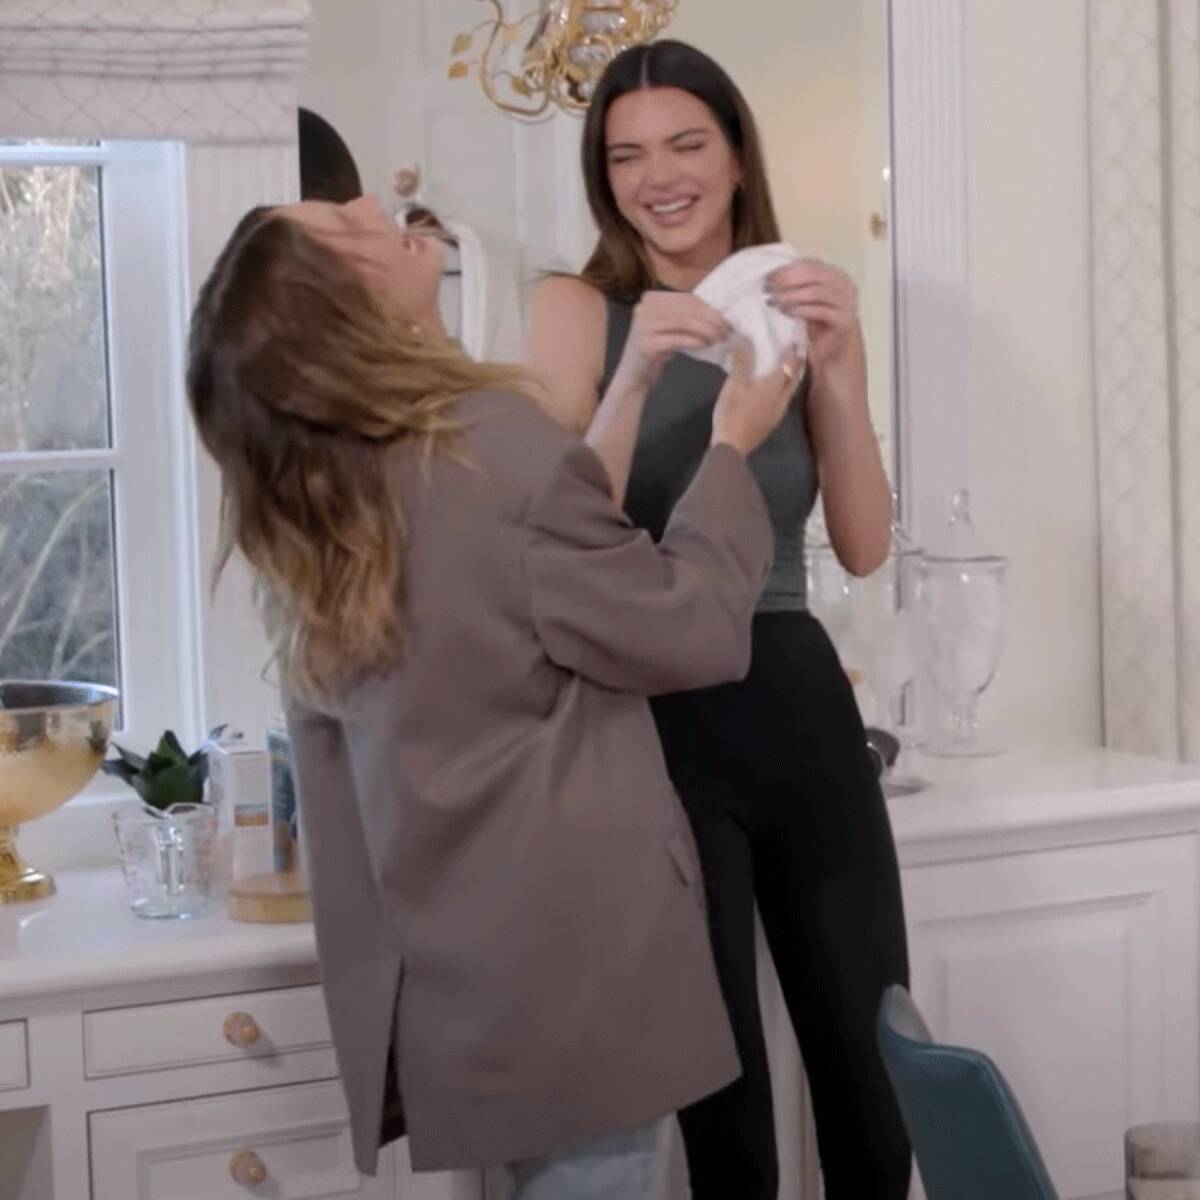 Watch Kendall Jenner and Hailey Bieber Spill Major Secrets in Game of "Never Have I Ever"